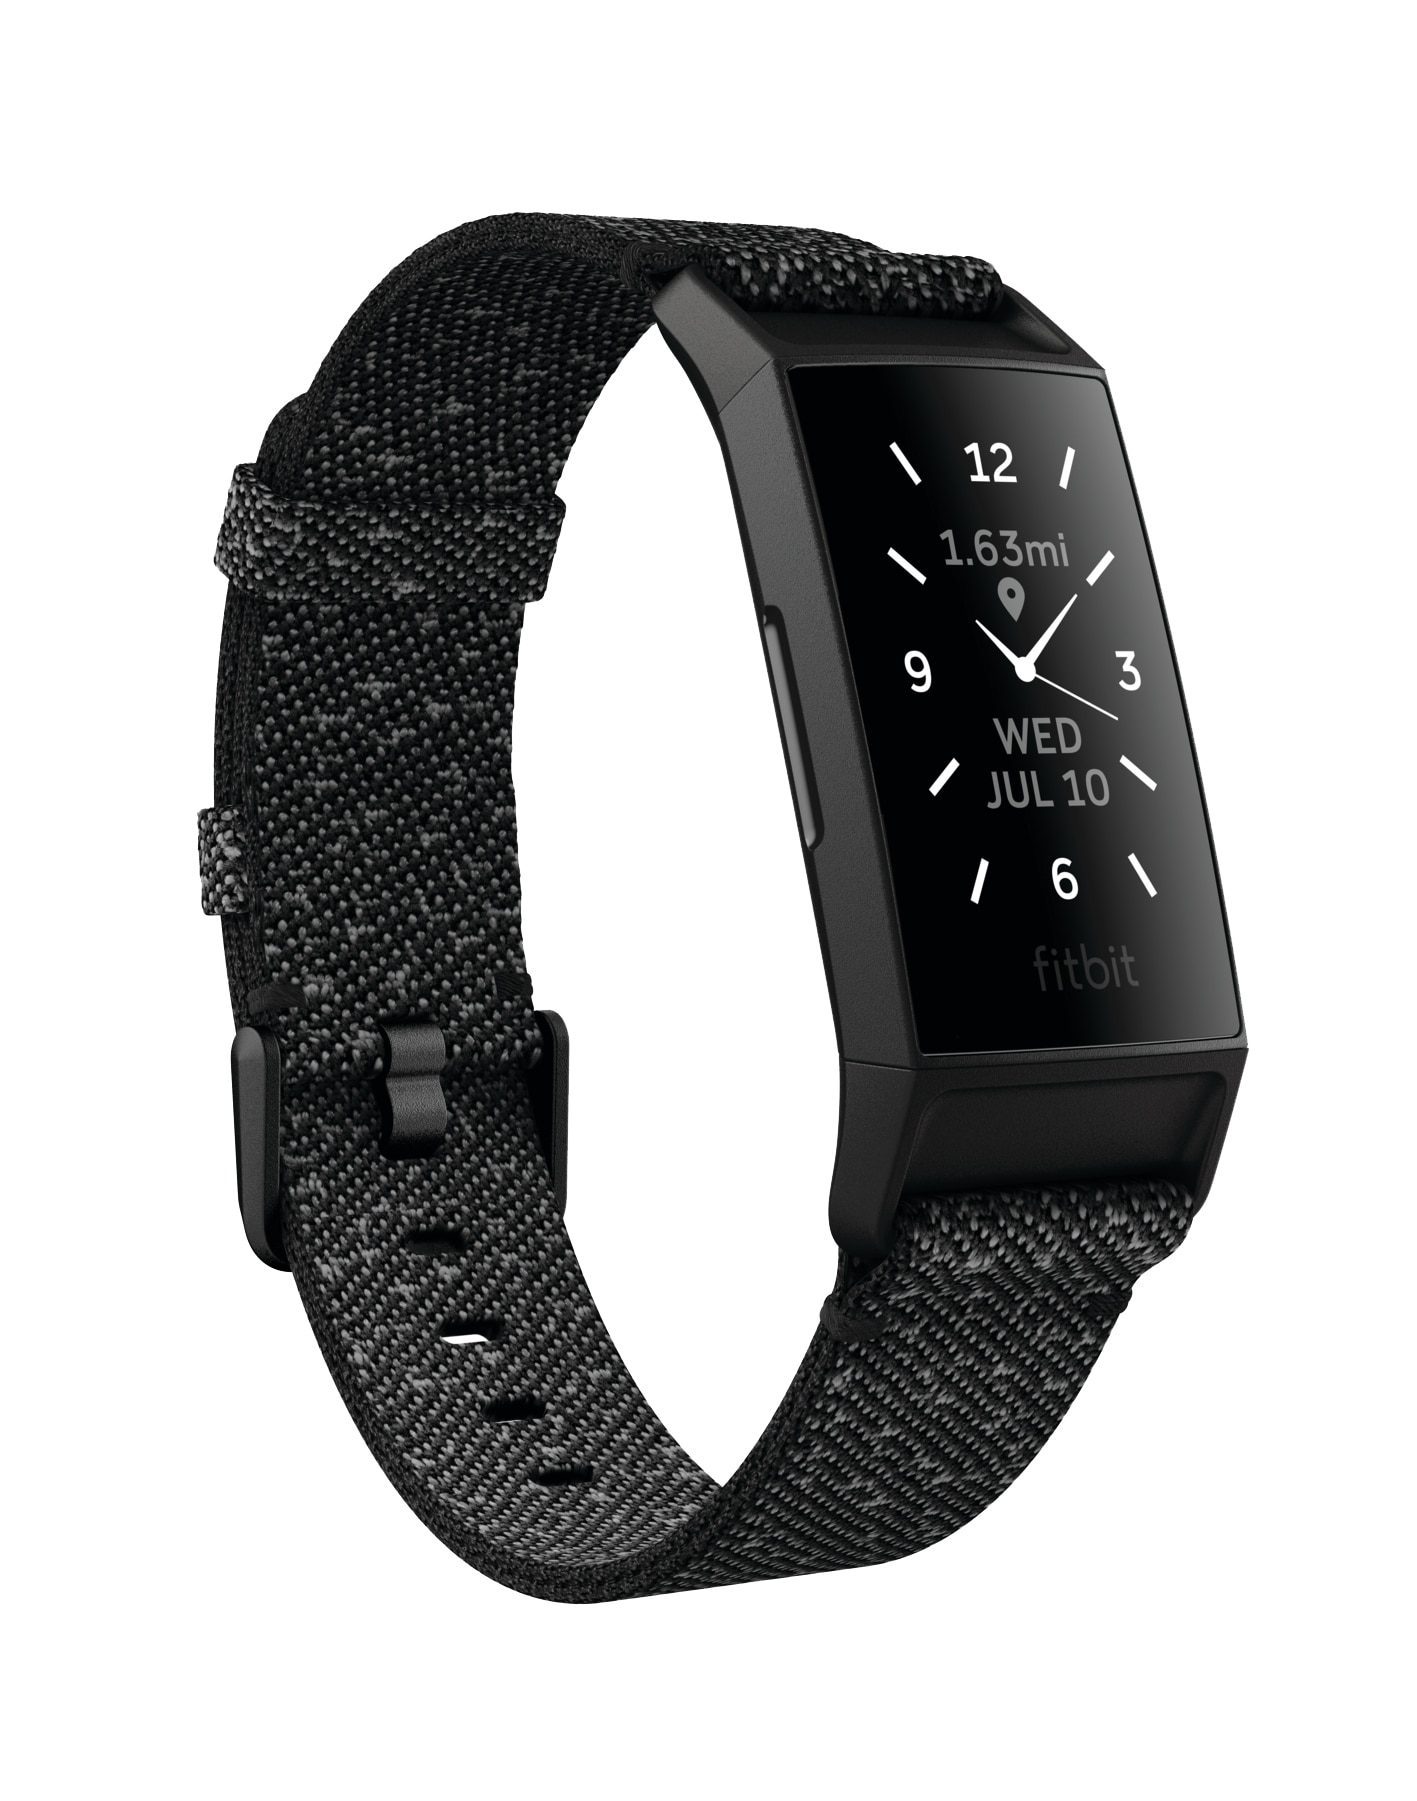 tsc.ca - Fitbit Charge 4 SE